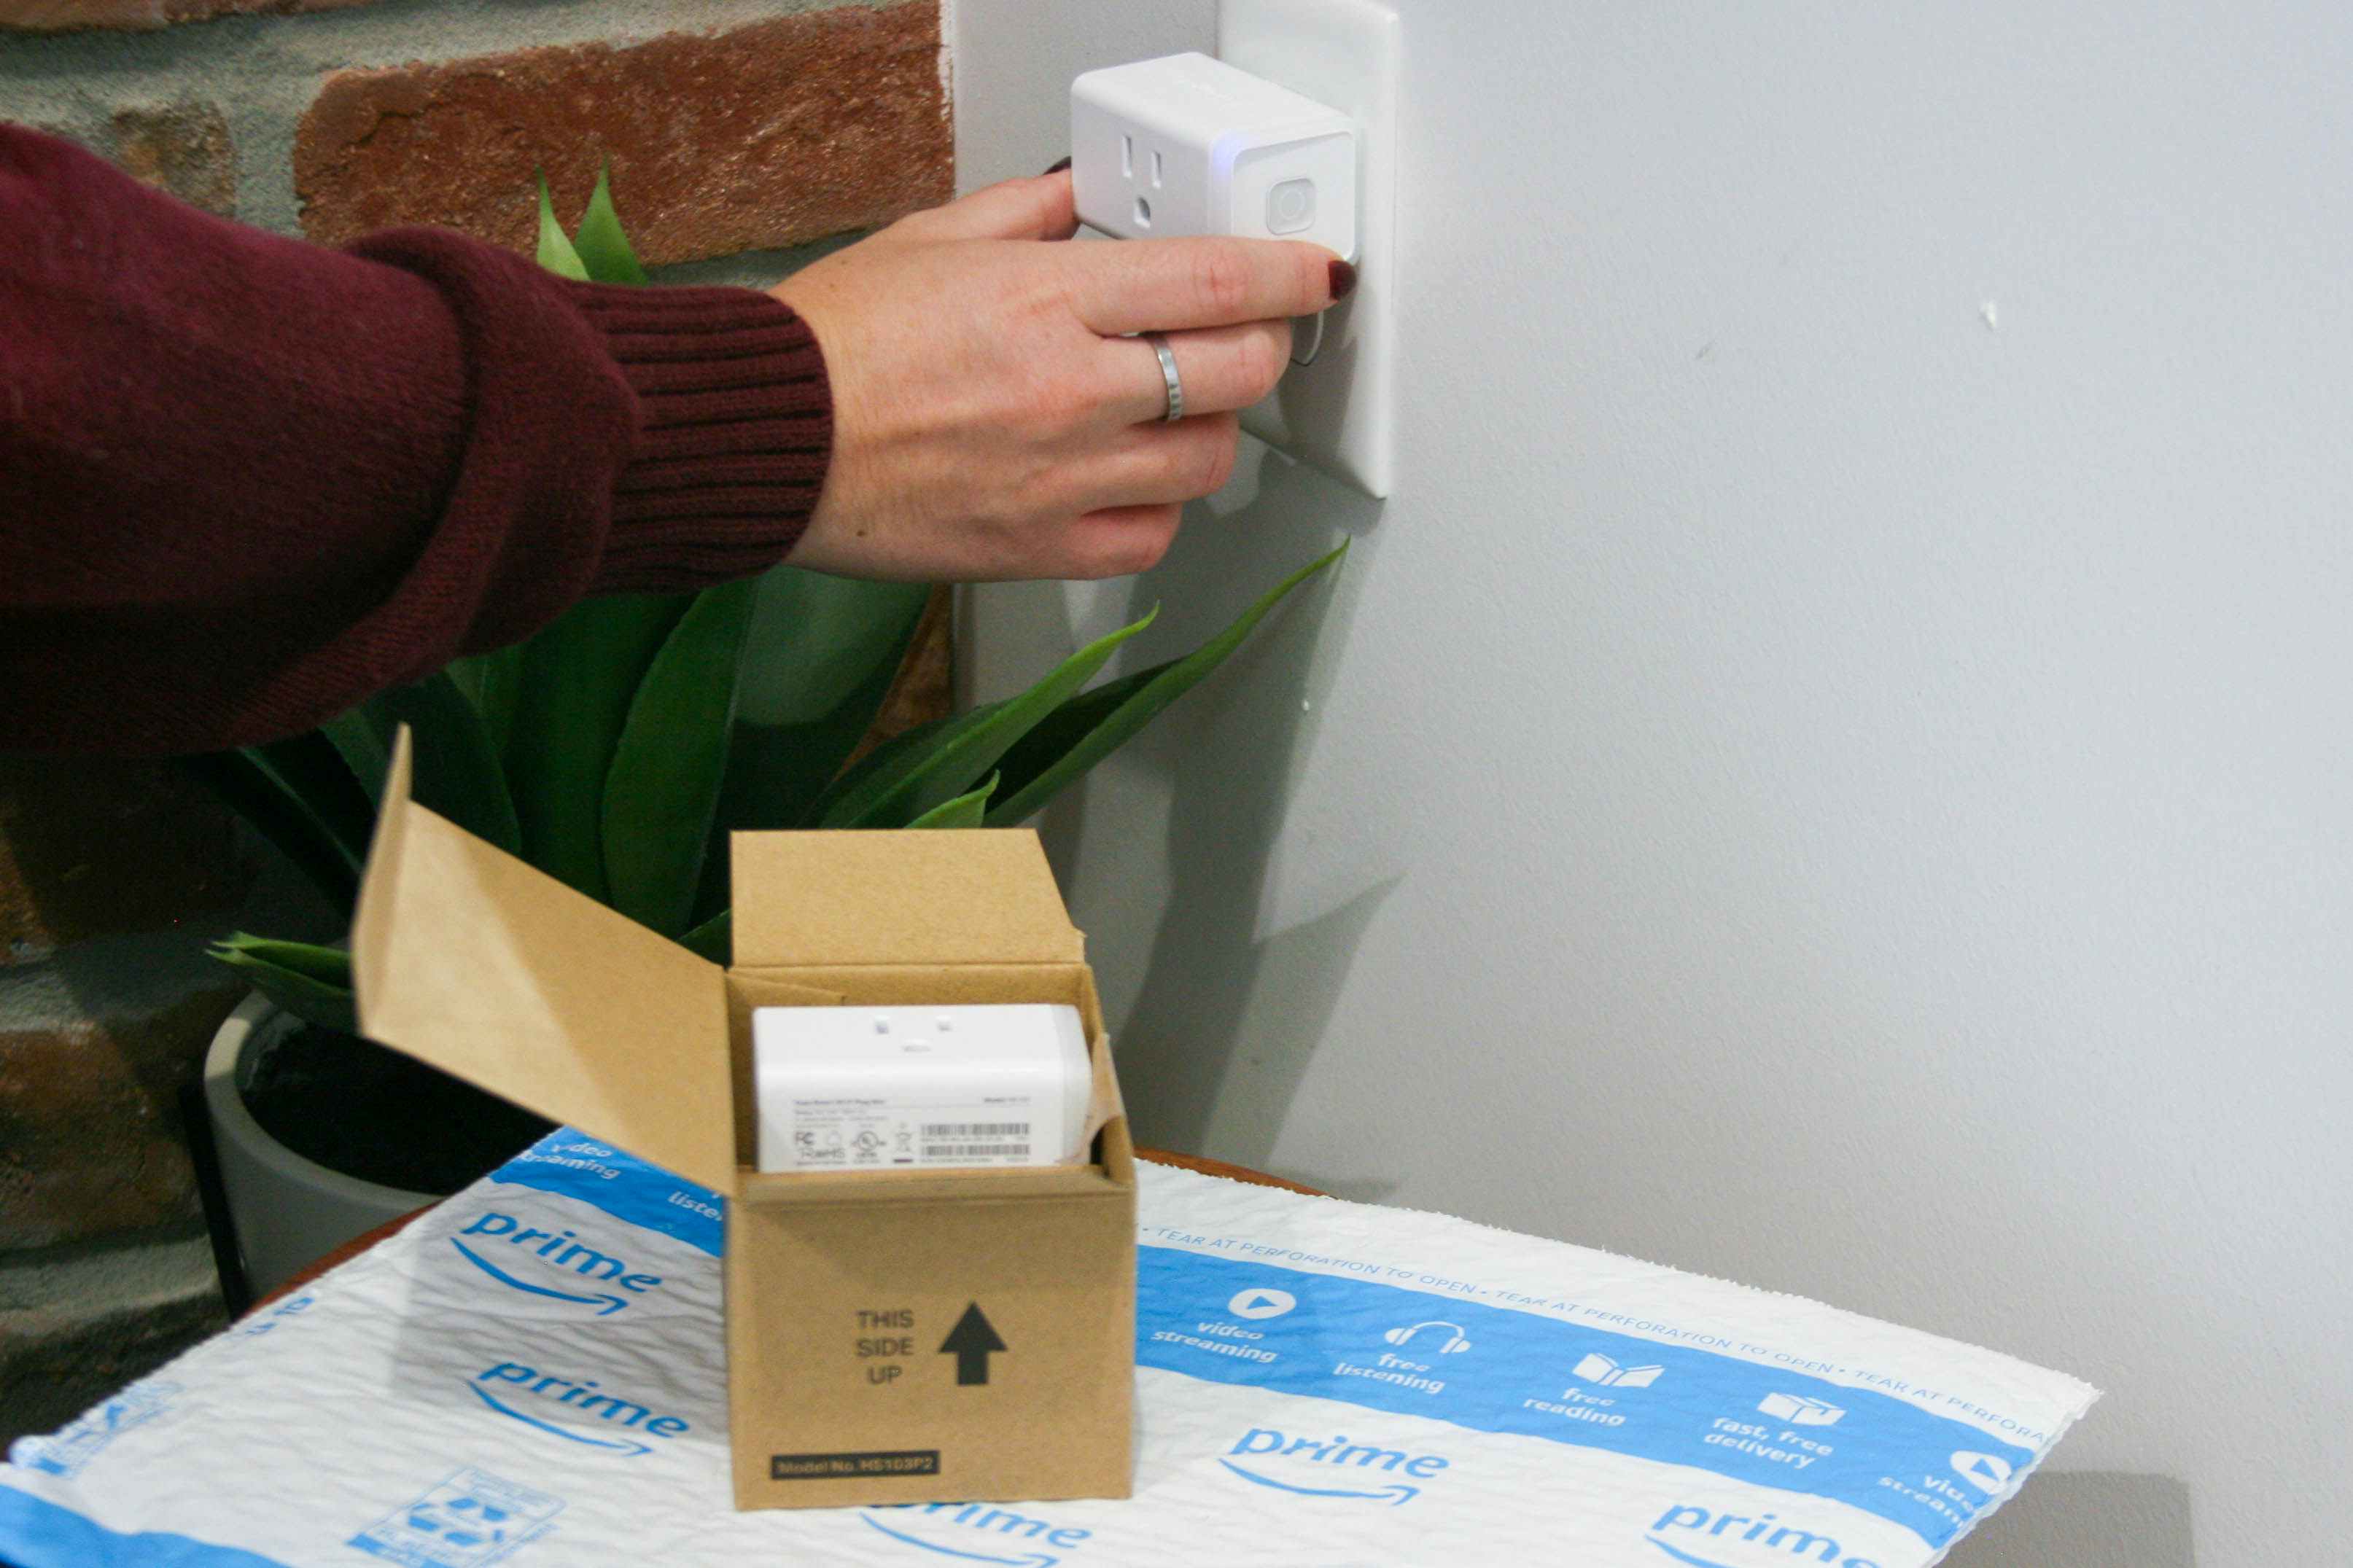 A person plugging a smart plug into an outlet next to a box of more smart plugs on top of an Amazon shipping envelope.